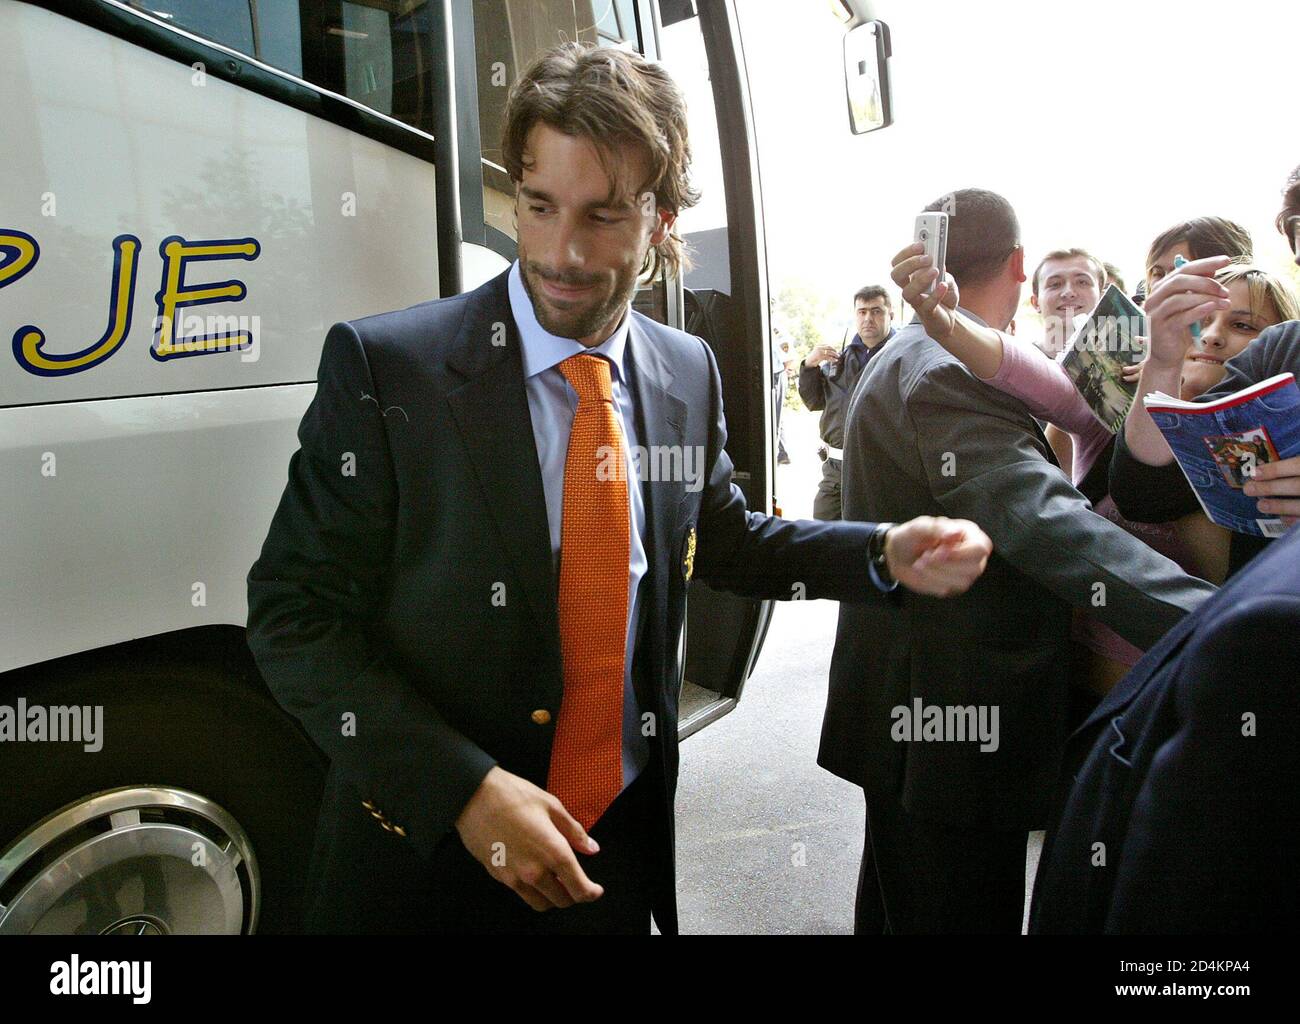 Dutch striker Ruud van Nistelrooy rushes past Macedonian fans after the team arrived at Macedonian capital Skopje, October 8, 2004. Macedonia will meet Netherlands on October 9 in their World Cup European zone Group one qualifying match. REUTERS/Ognen Teofilovski  OP Stock Photo